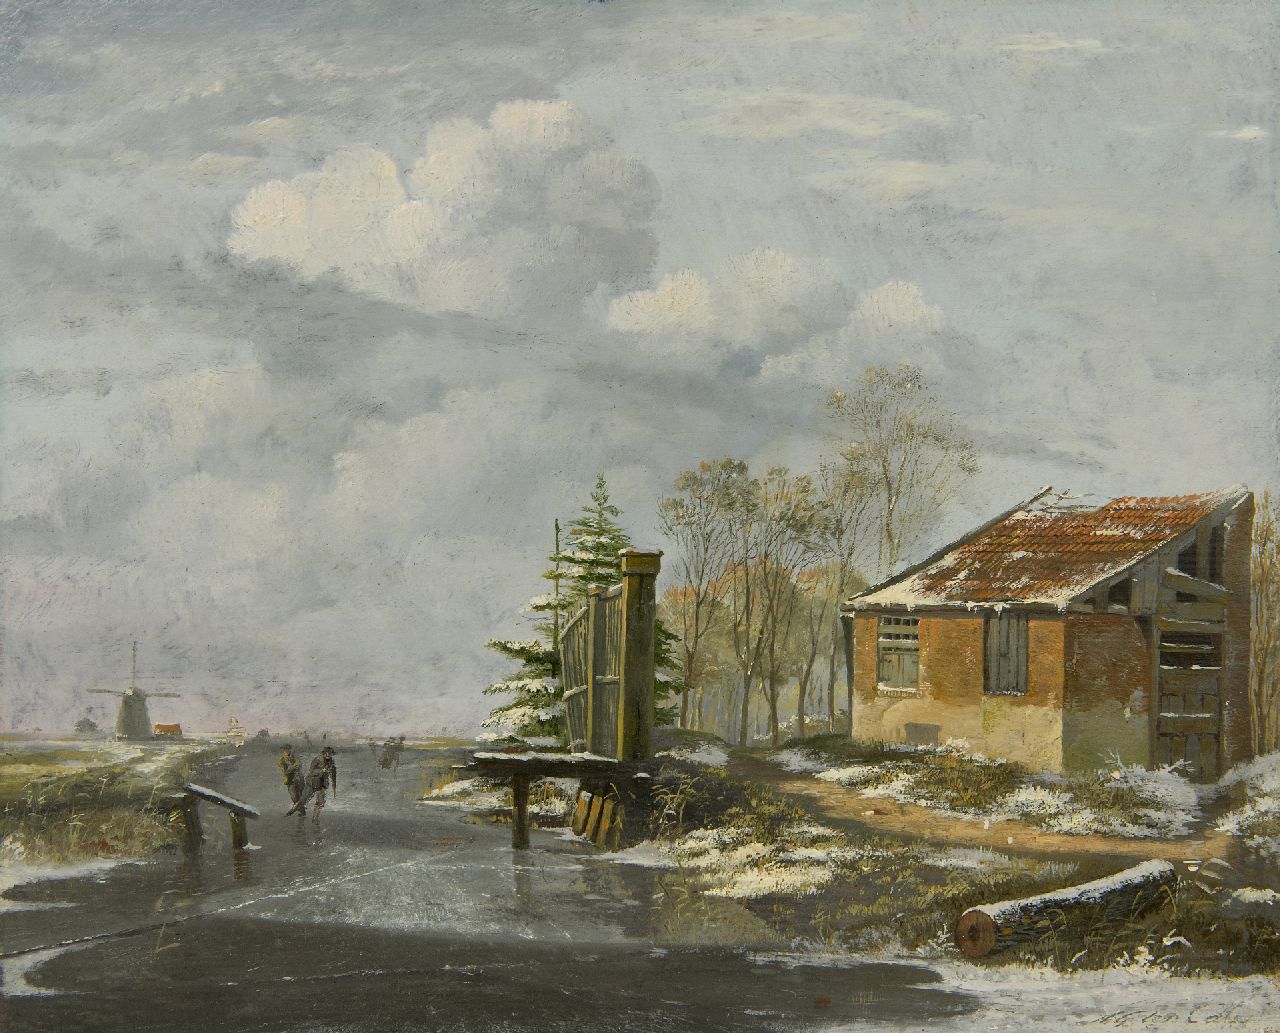 Cate H.G. ten | Hendrik Gerrit ten Cate | Paintings offered for sale | Skaters in a snowy winterlandscape, oil on panel 25.8 x 31.9 cm, signed l.r.